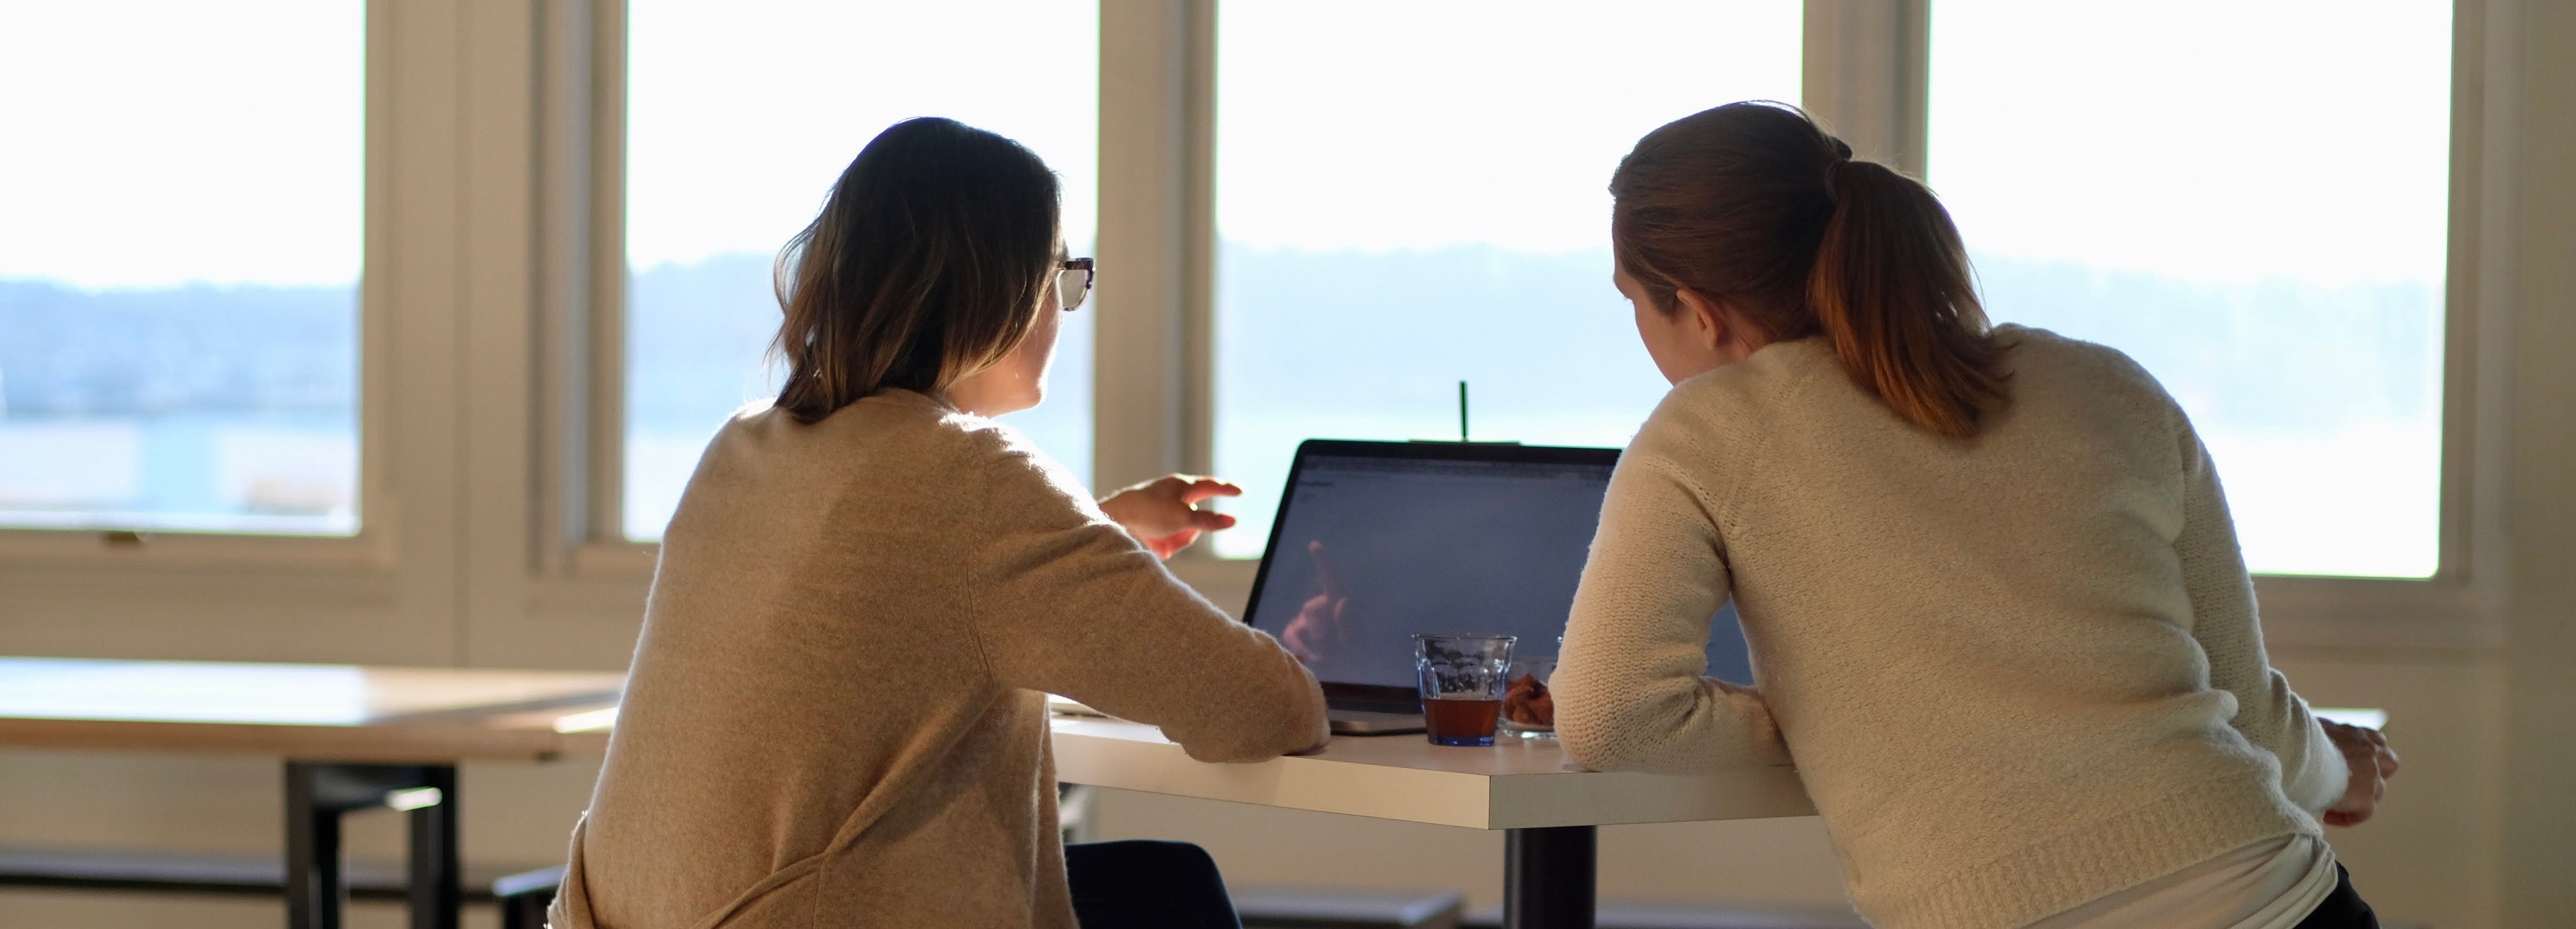 Two women coworkers looking at a laptop screen